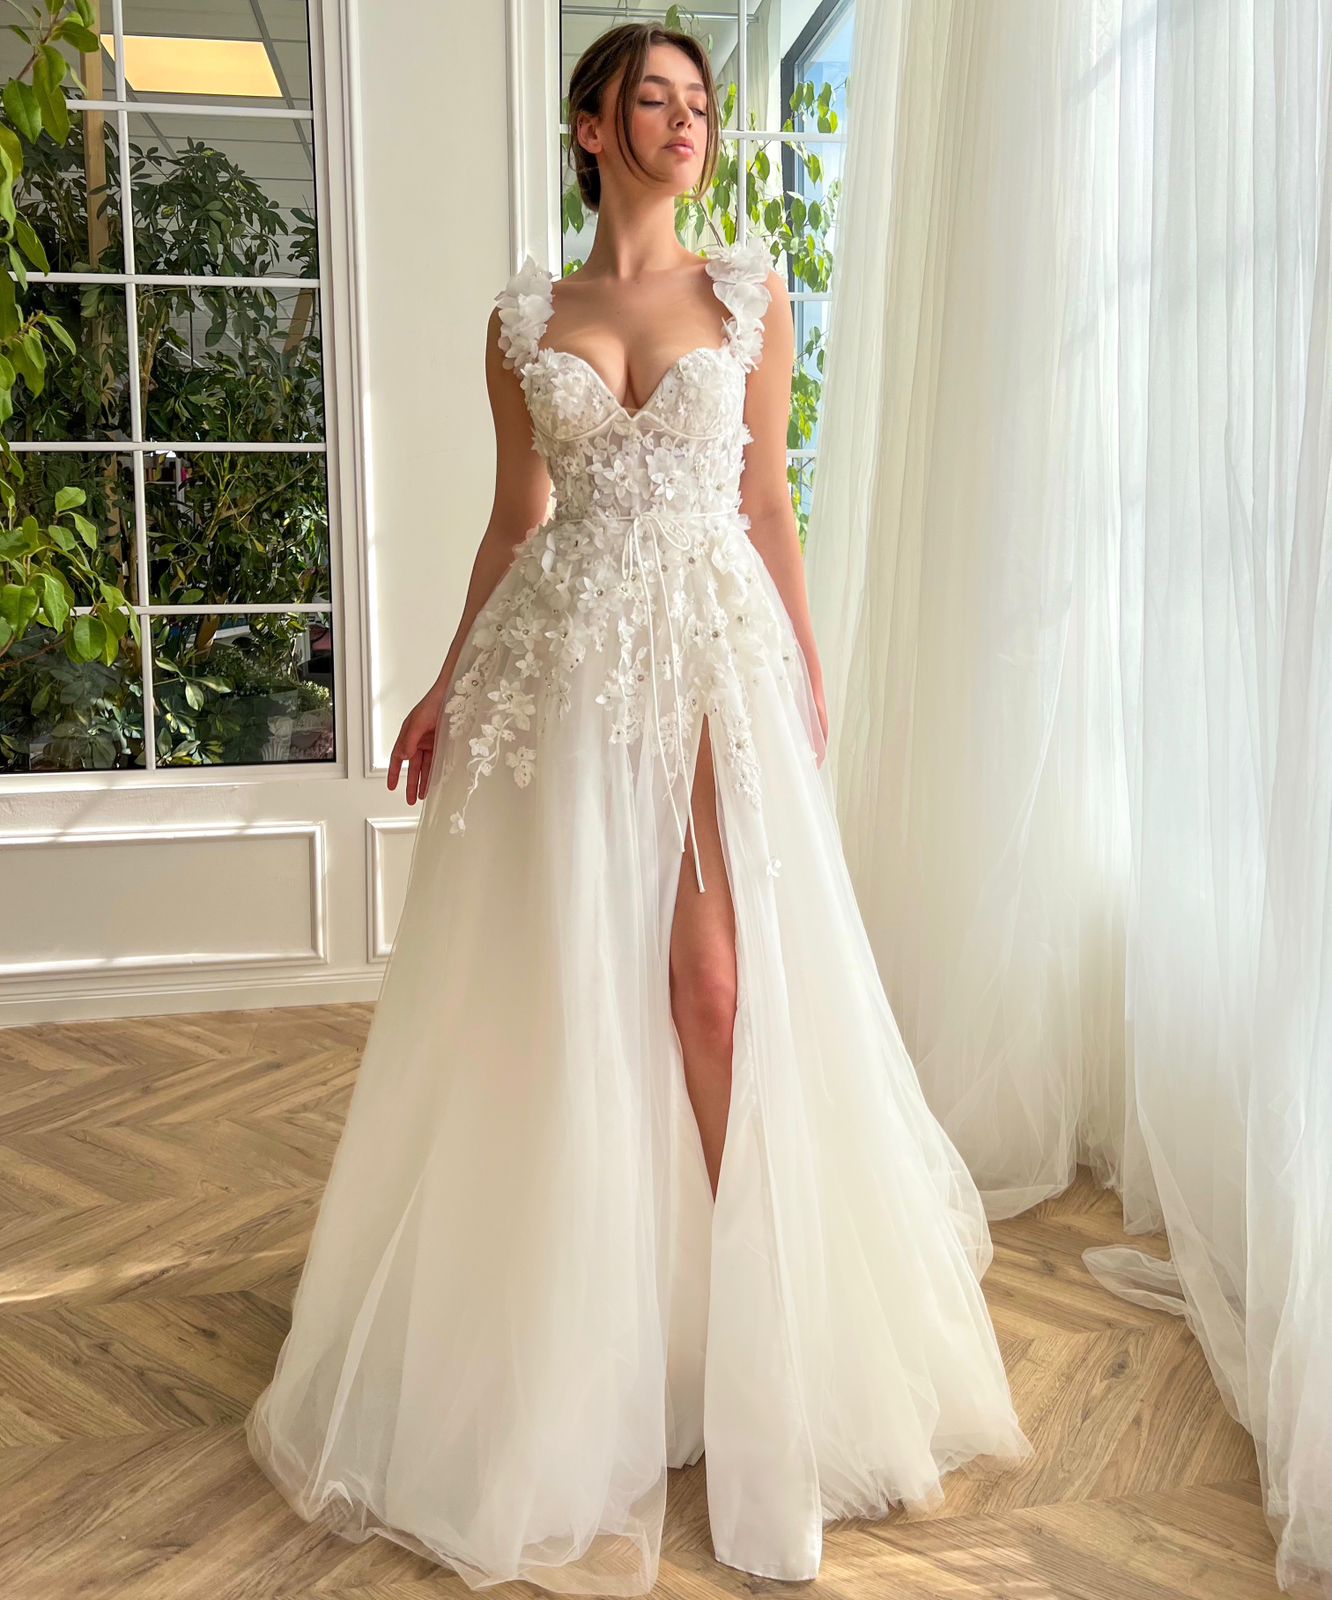 V-Neck A-line Wedding Dress With Lace Bodice and Satin Skirt - June Bridals